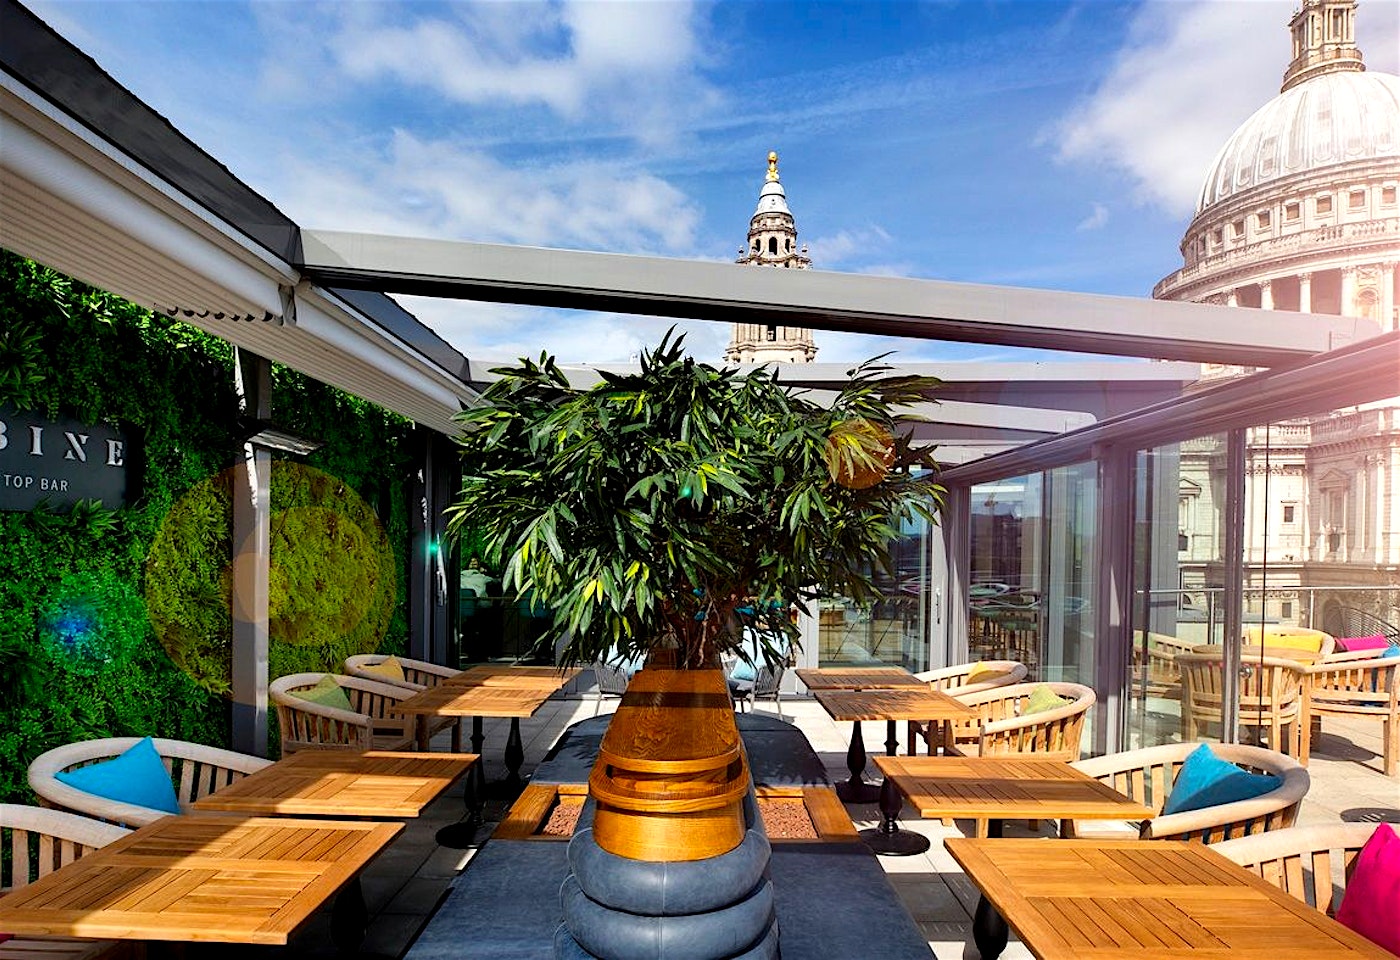 This St Pauls bar is on a beautiful rooftop overlooking the famous cathedral